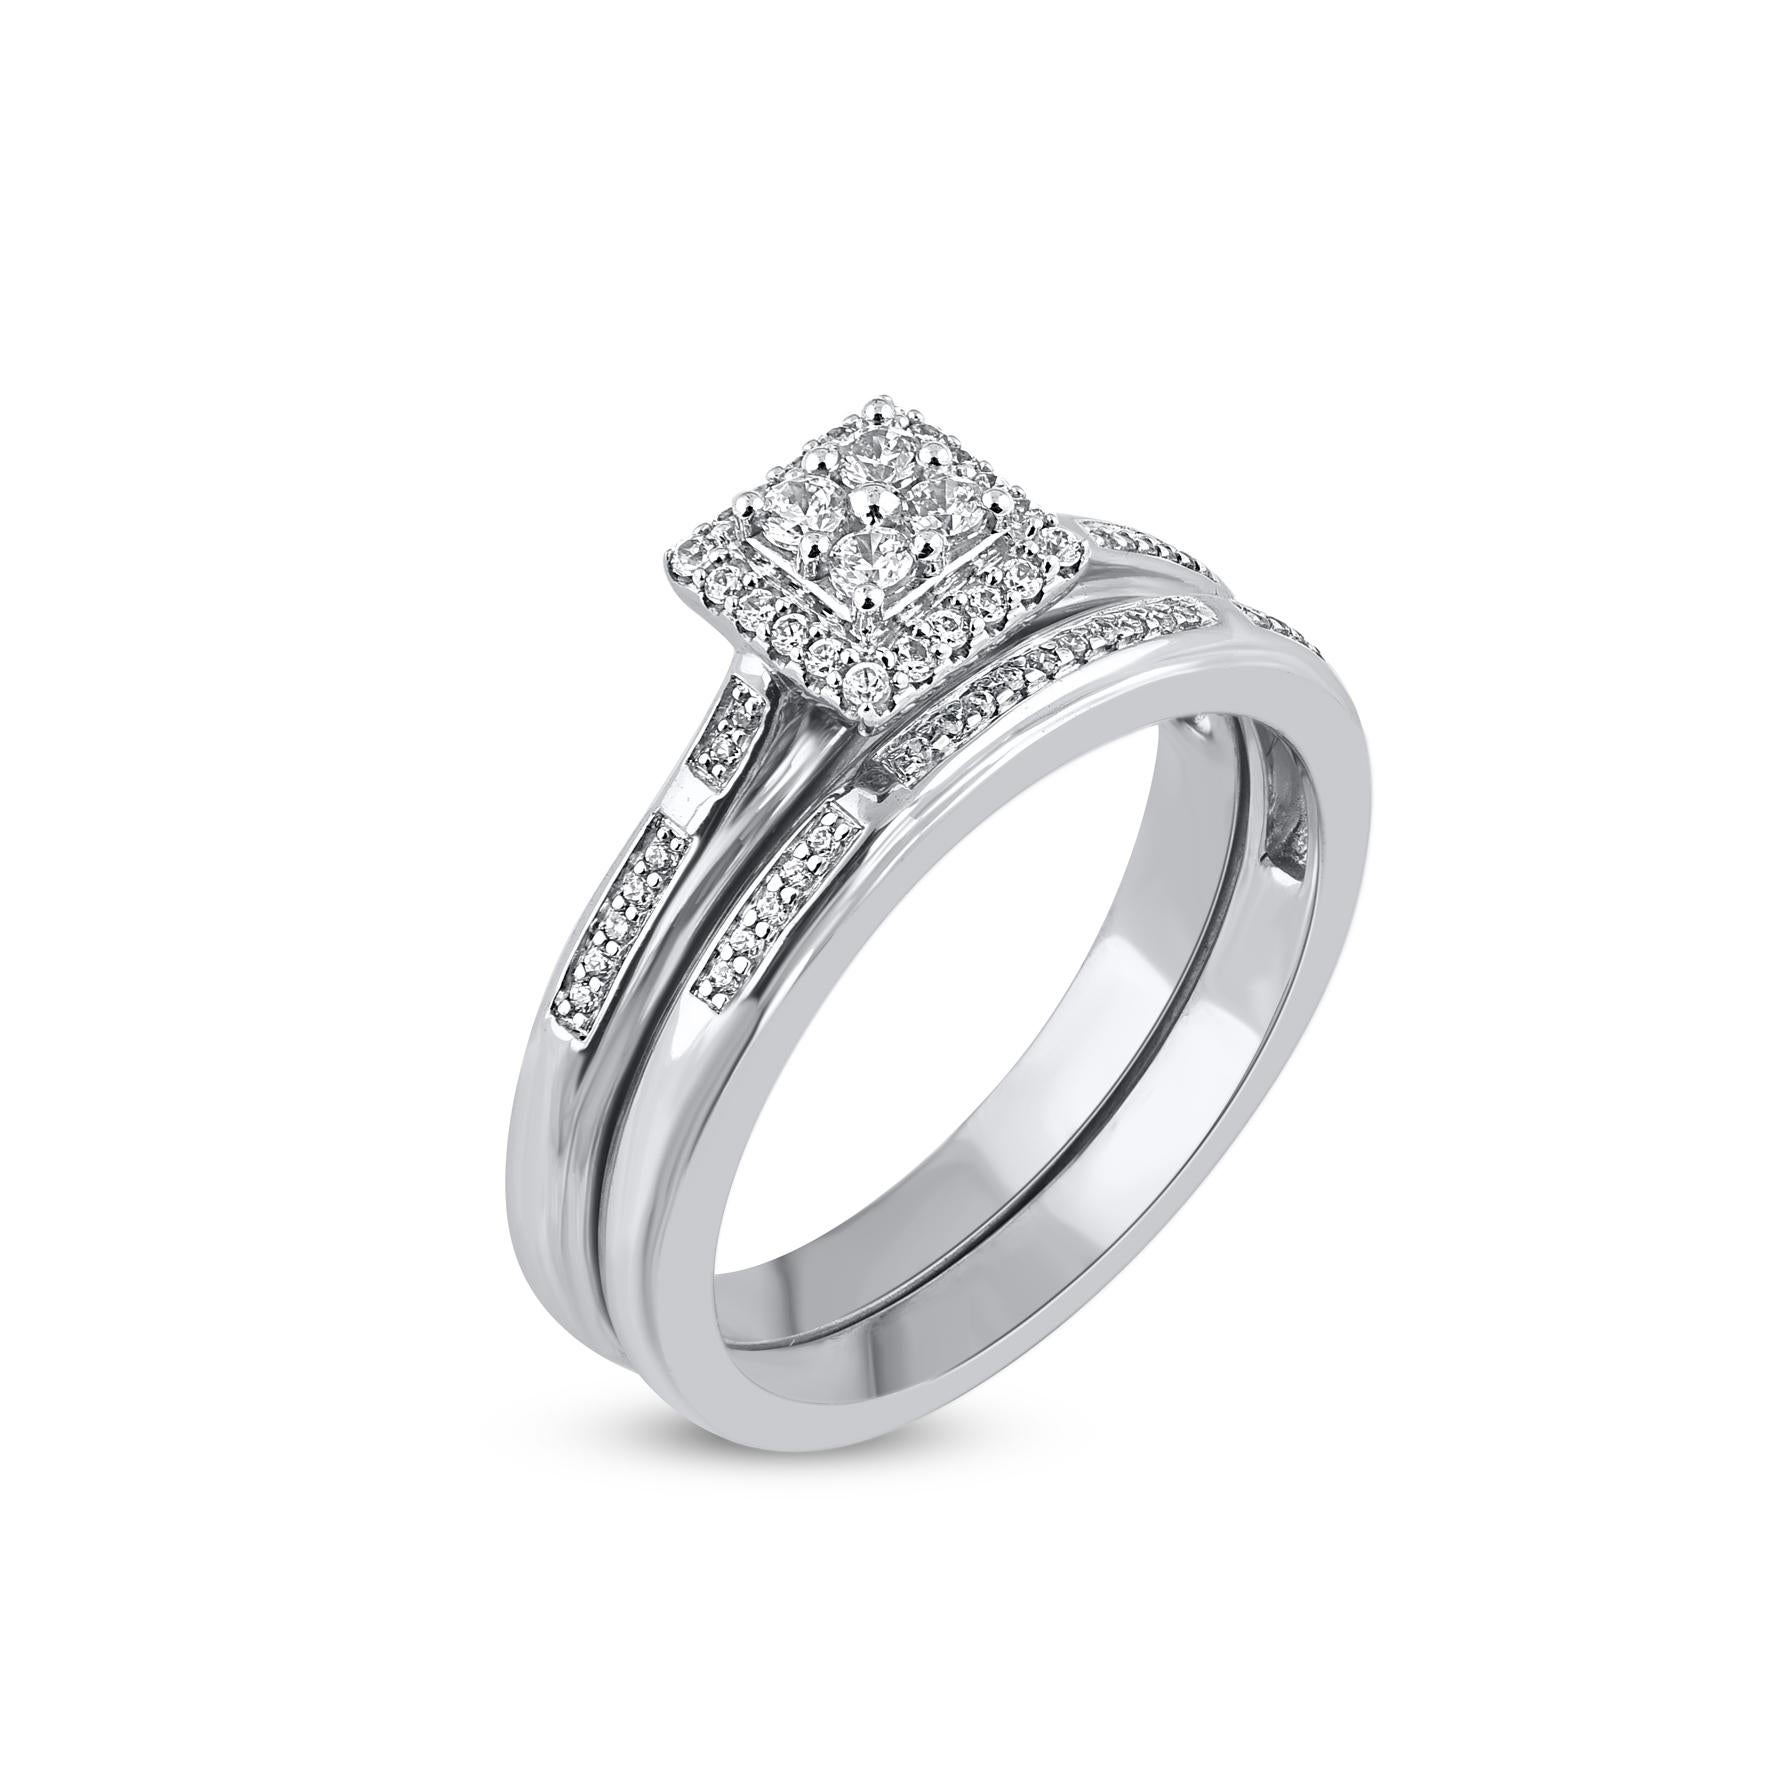 Sweet and simple in design, this diamond bridal set is sure to charm on your big day. Crafted in 14 Karat white gold. This wedding ring features a sparkling 58 brilliant cut and single cut round diamond beautifully set in prong & pave setting. The